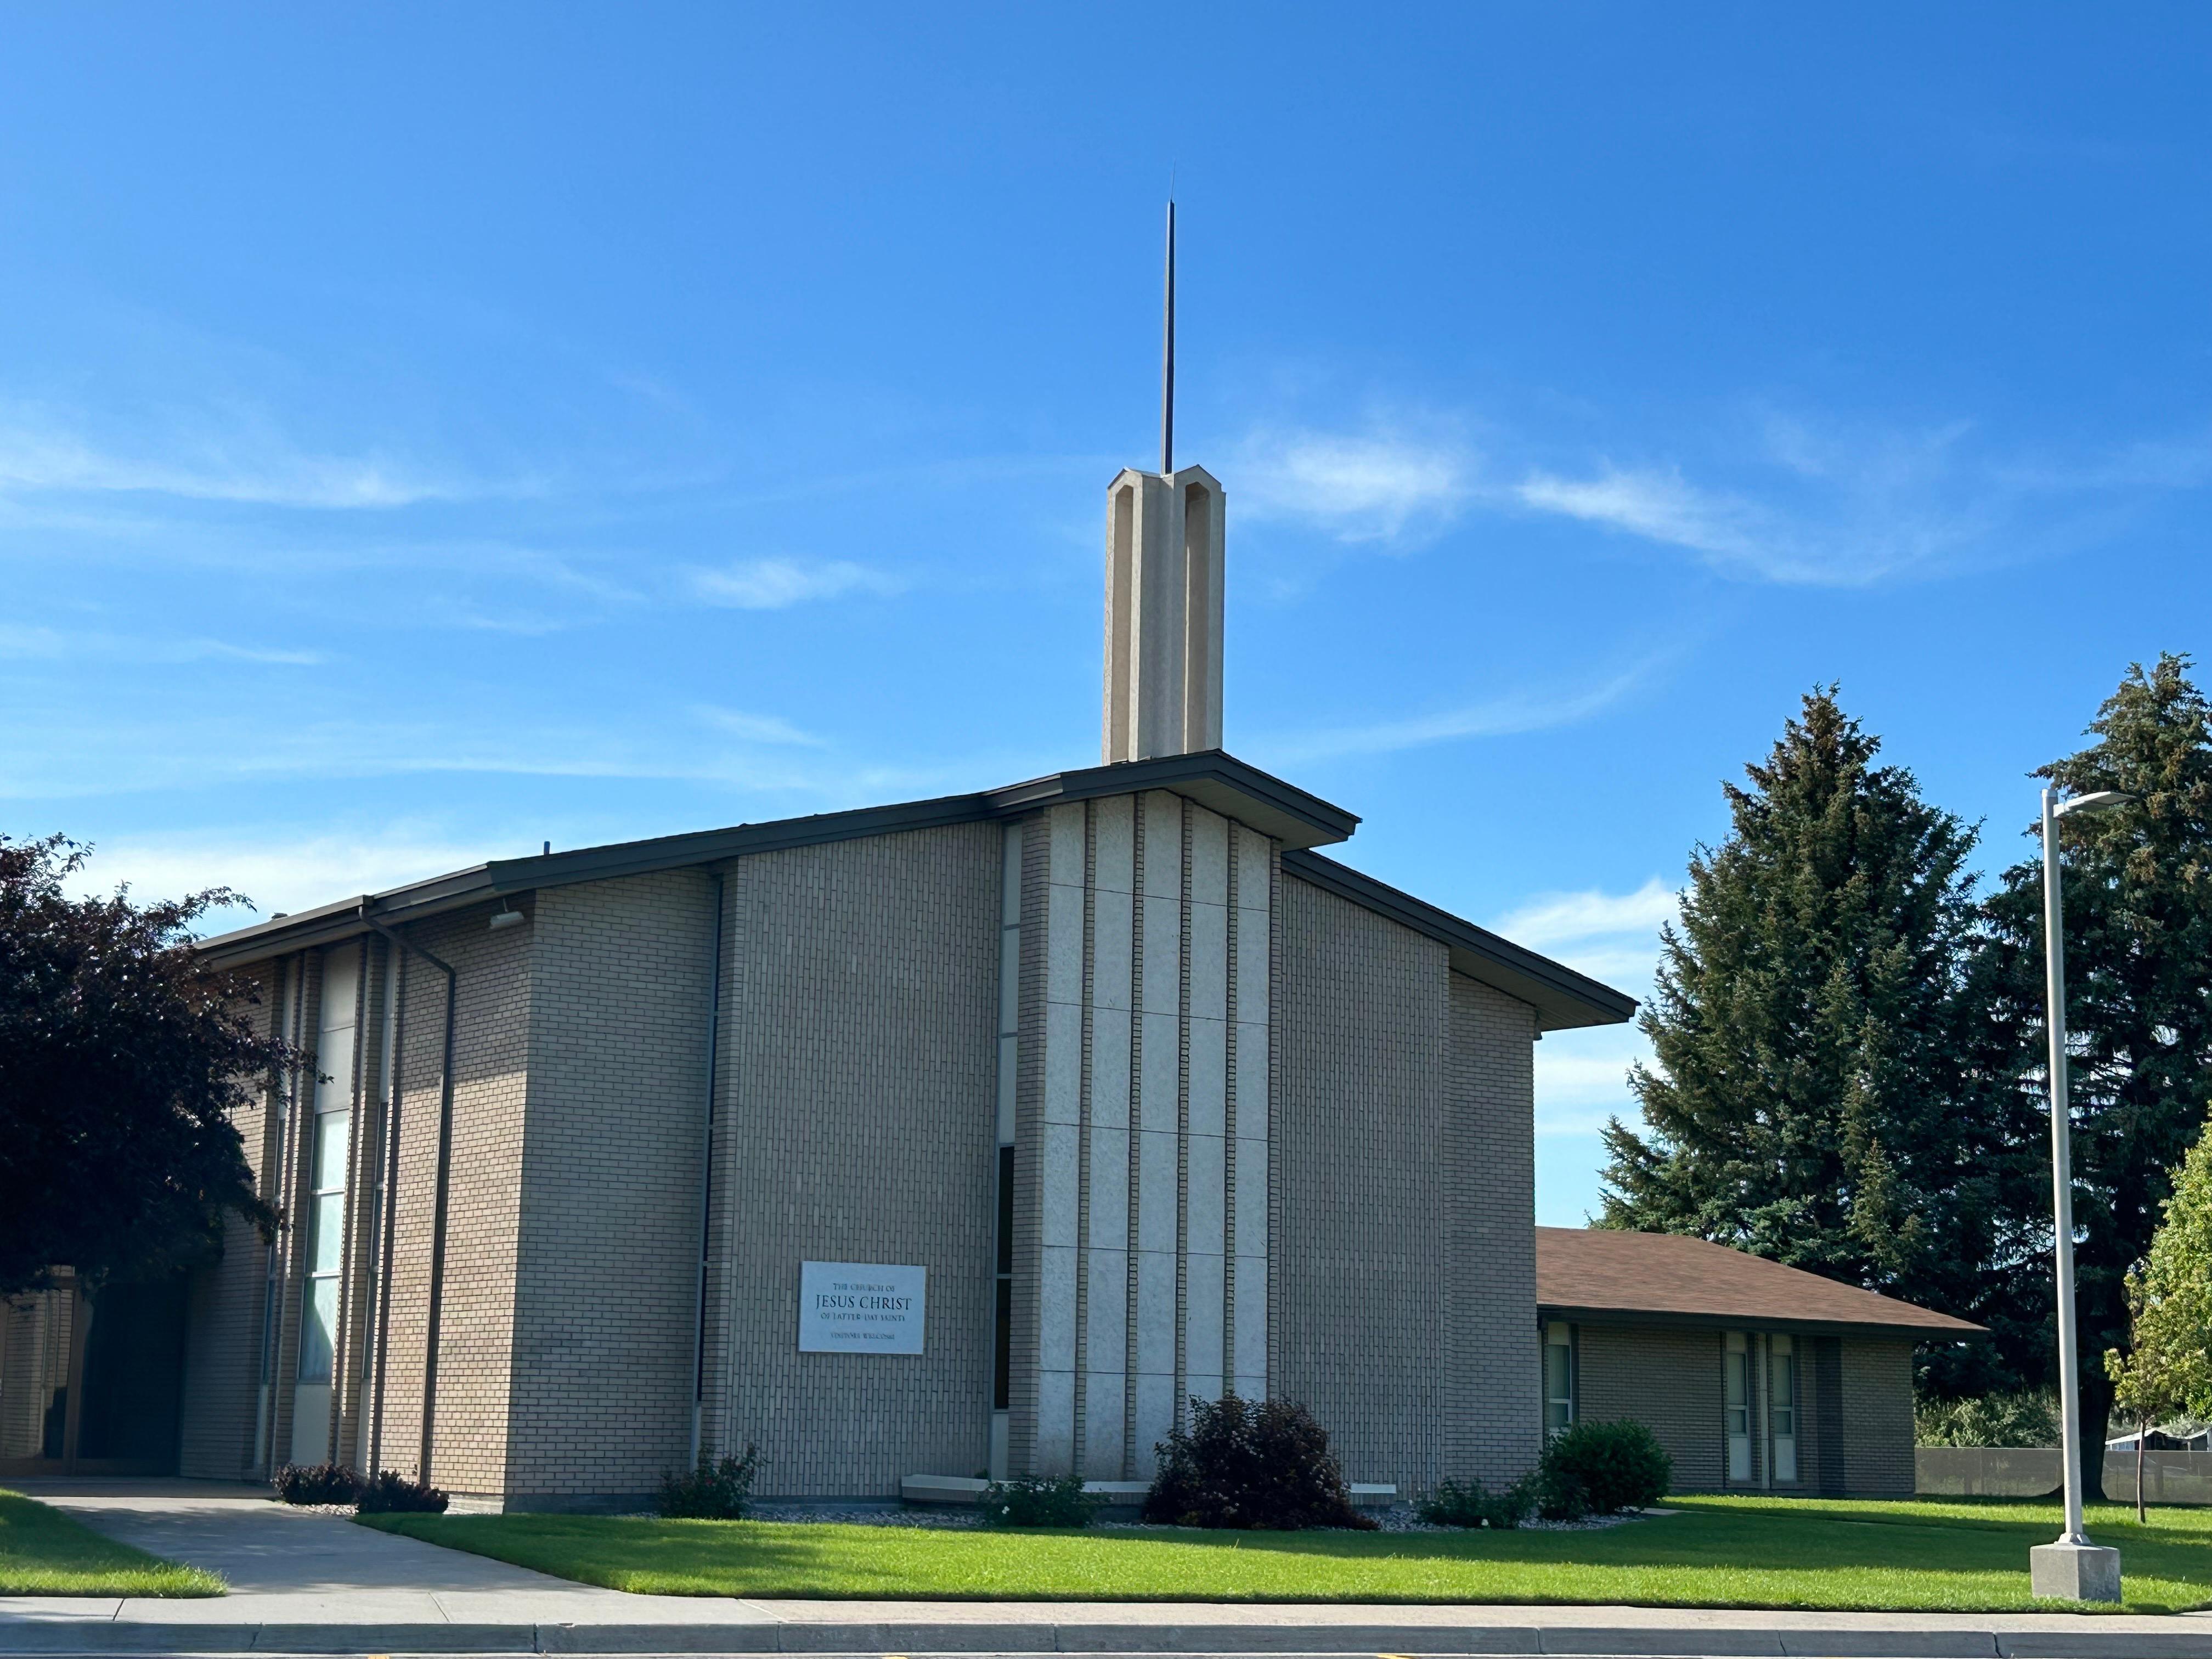 Outside of the Fort Hall Building of The Church of Jesus Christ of Latter-Day Saints located at 333 South Treaty Hwy (US 91)
in Pocatello, ID.